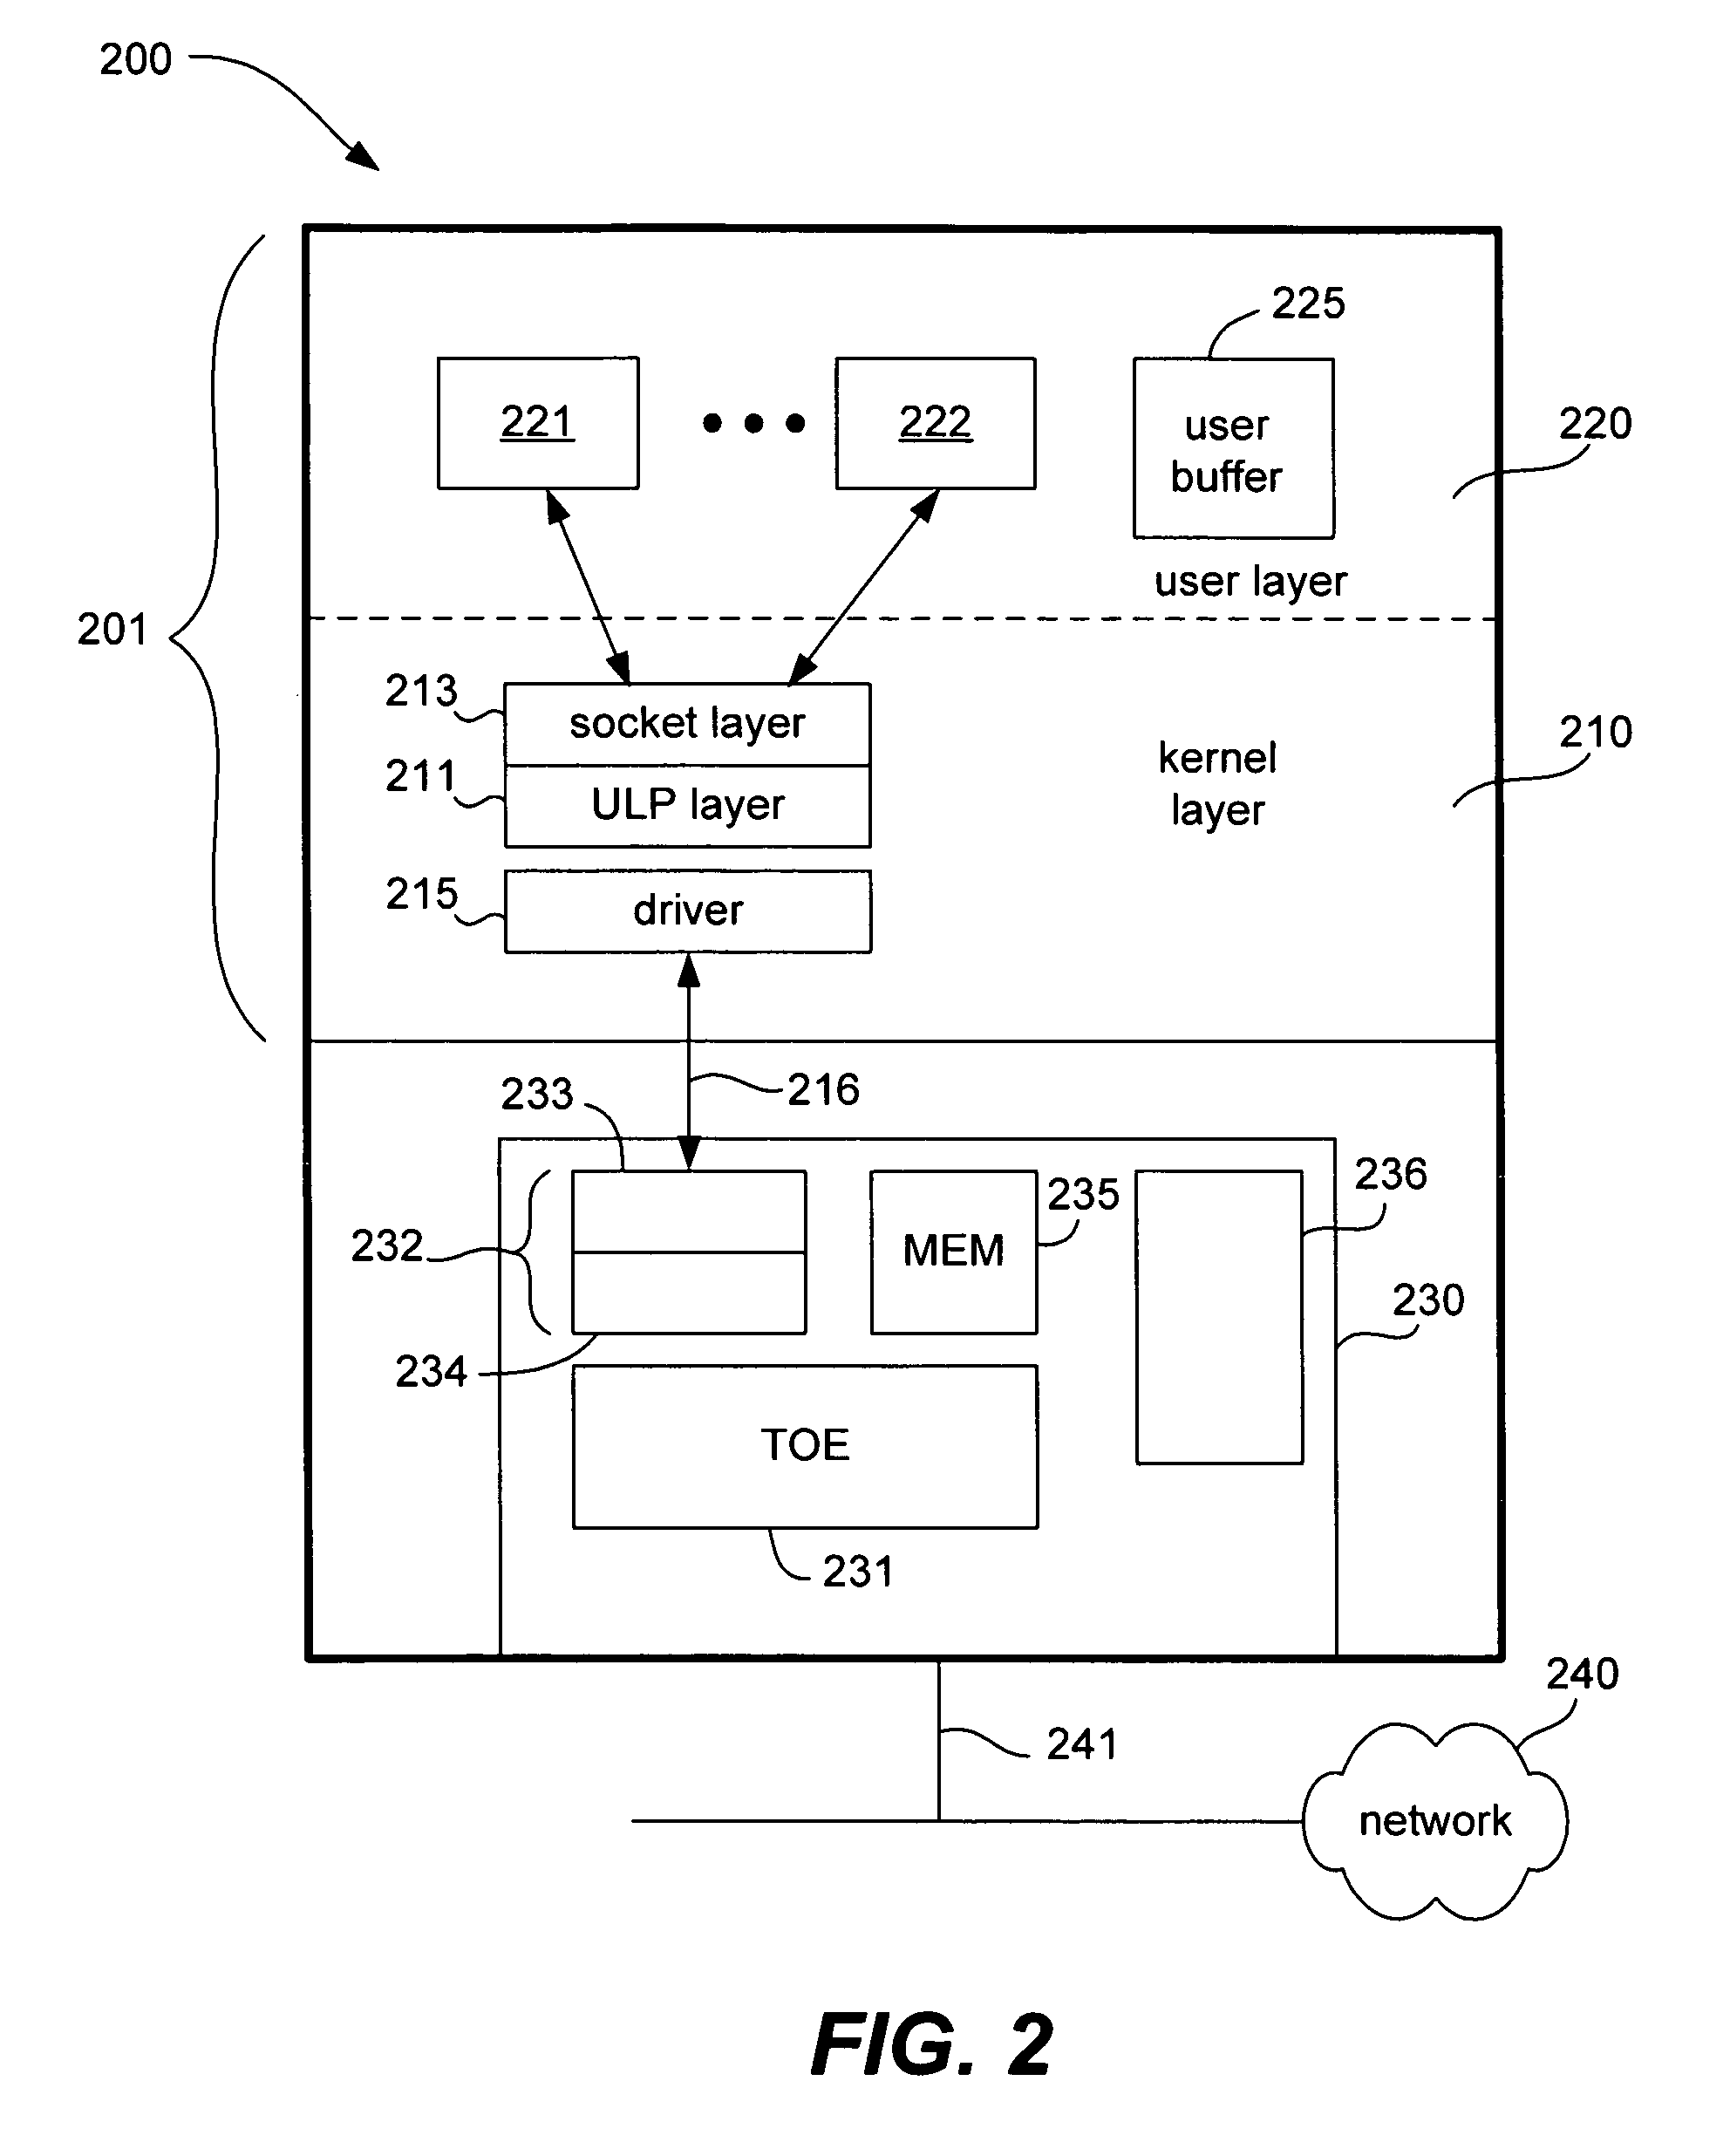 System and method for conducting direct data placement (DDP) using a TOE (TCP offload engine) capable network interface card